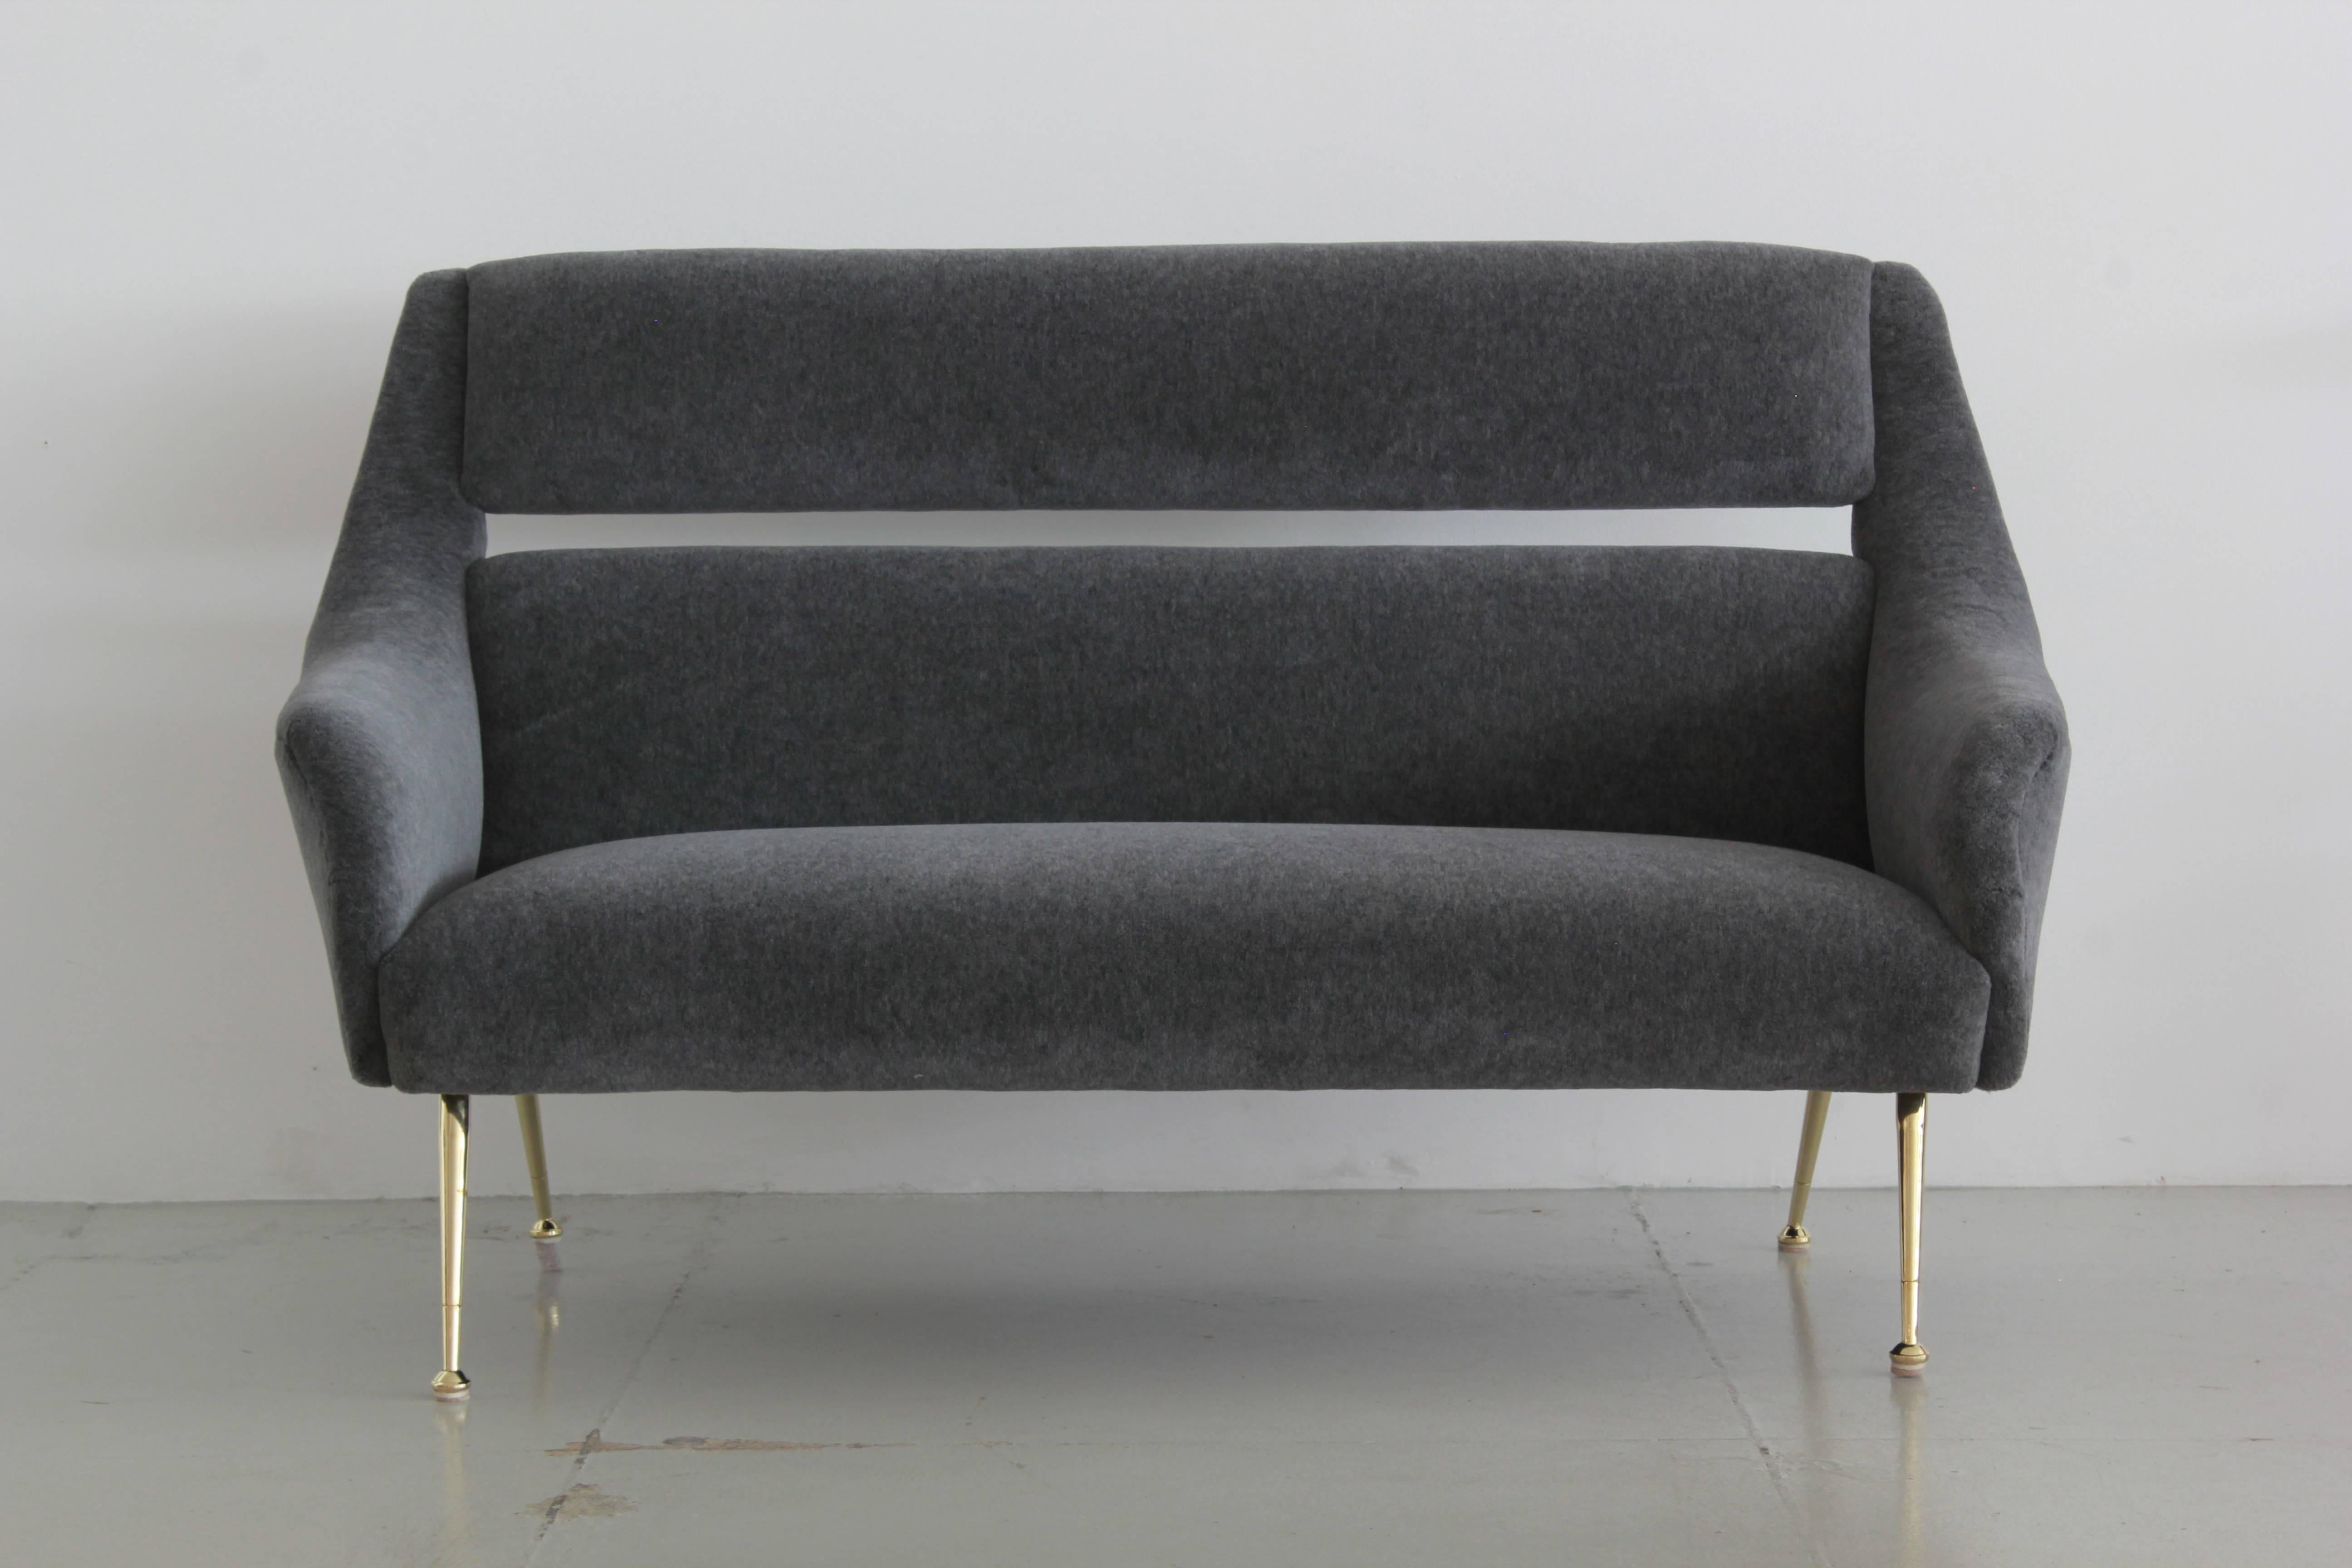 Gorgeous Italian settee newly upholstered in grey alpaca mohair. 
Cut out back with slender brass legs. 